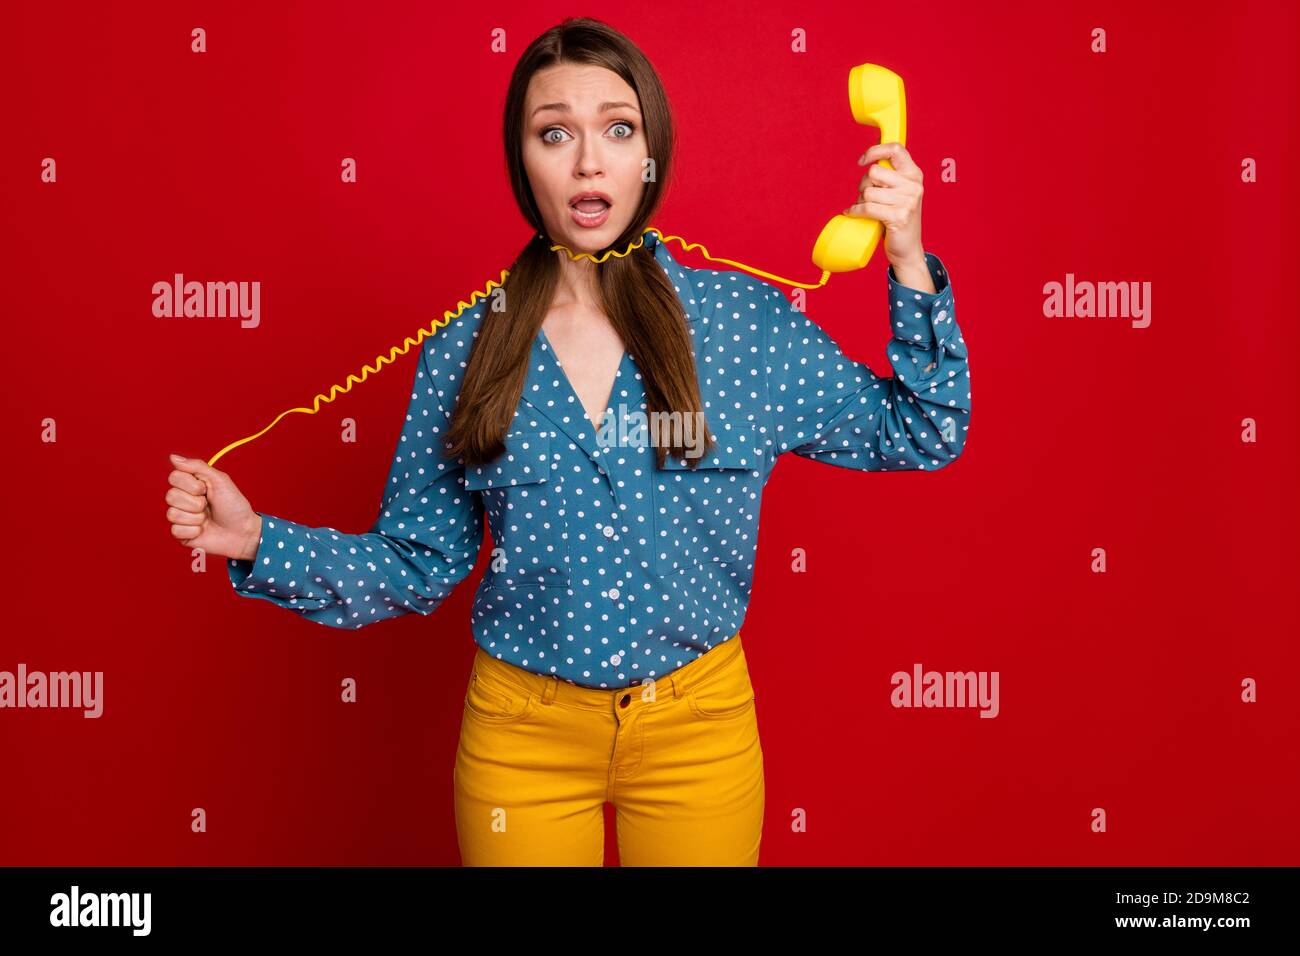 Portrait of pretty desperate girl holding in hand handset receiver strangling herself isolated on bright red color background Stock Photo